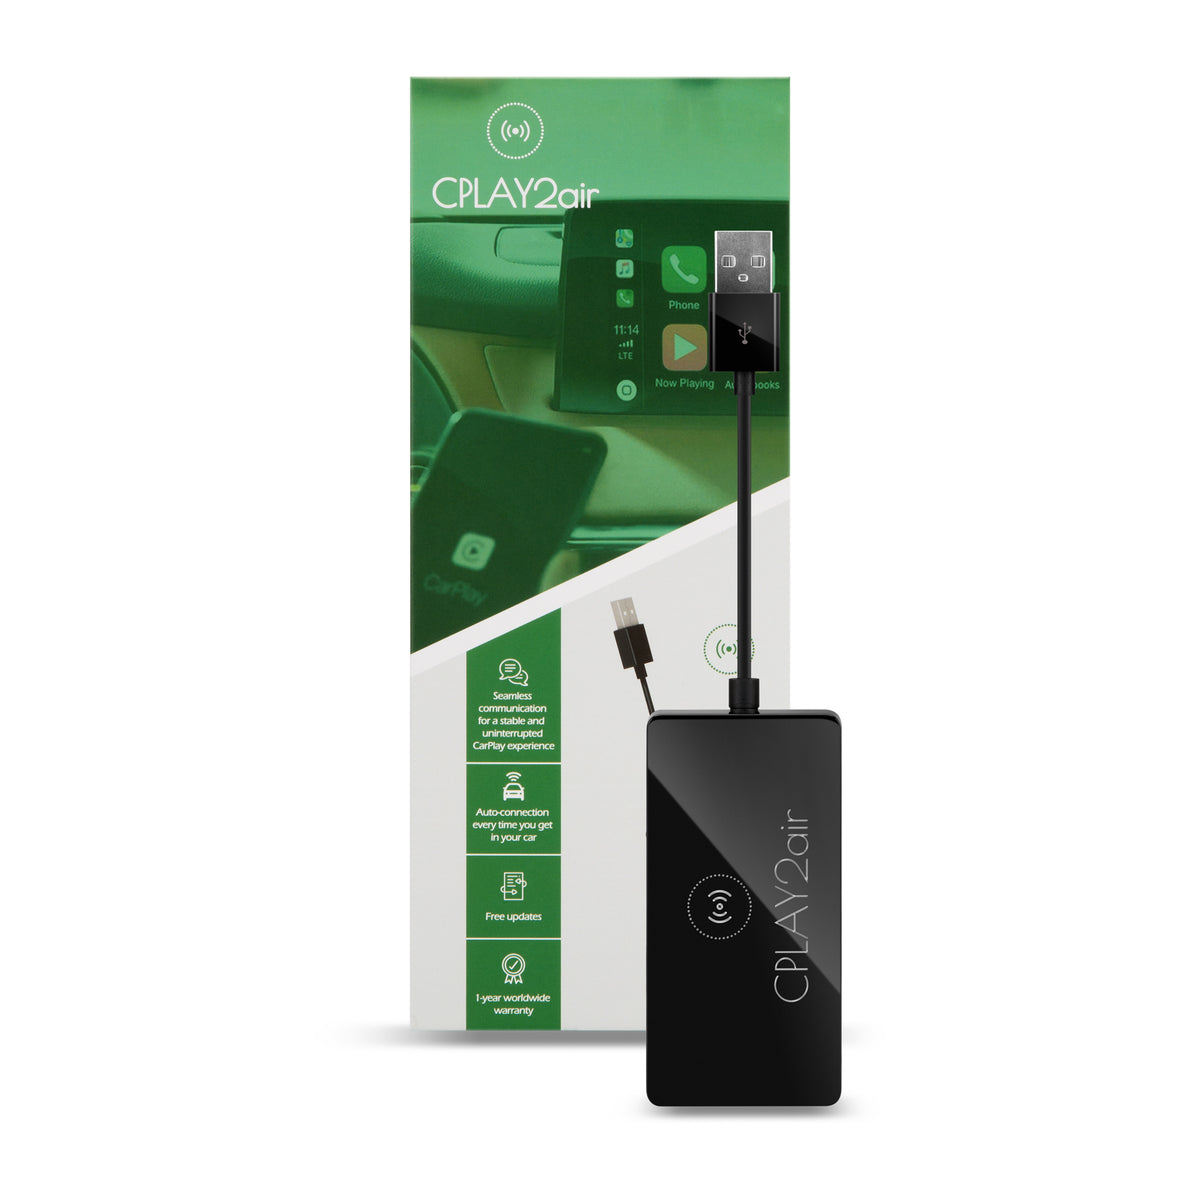 CPLAY2air wireless adapter for CarPlay –